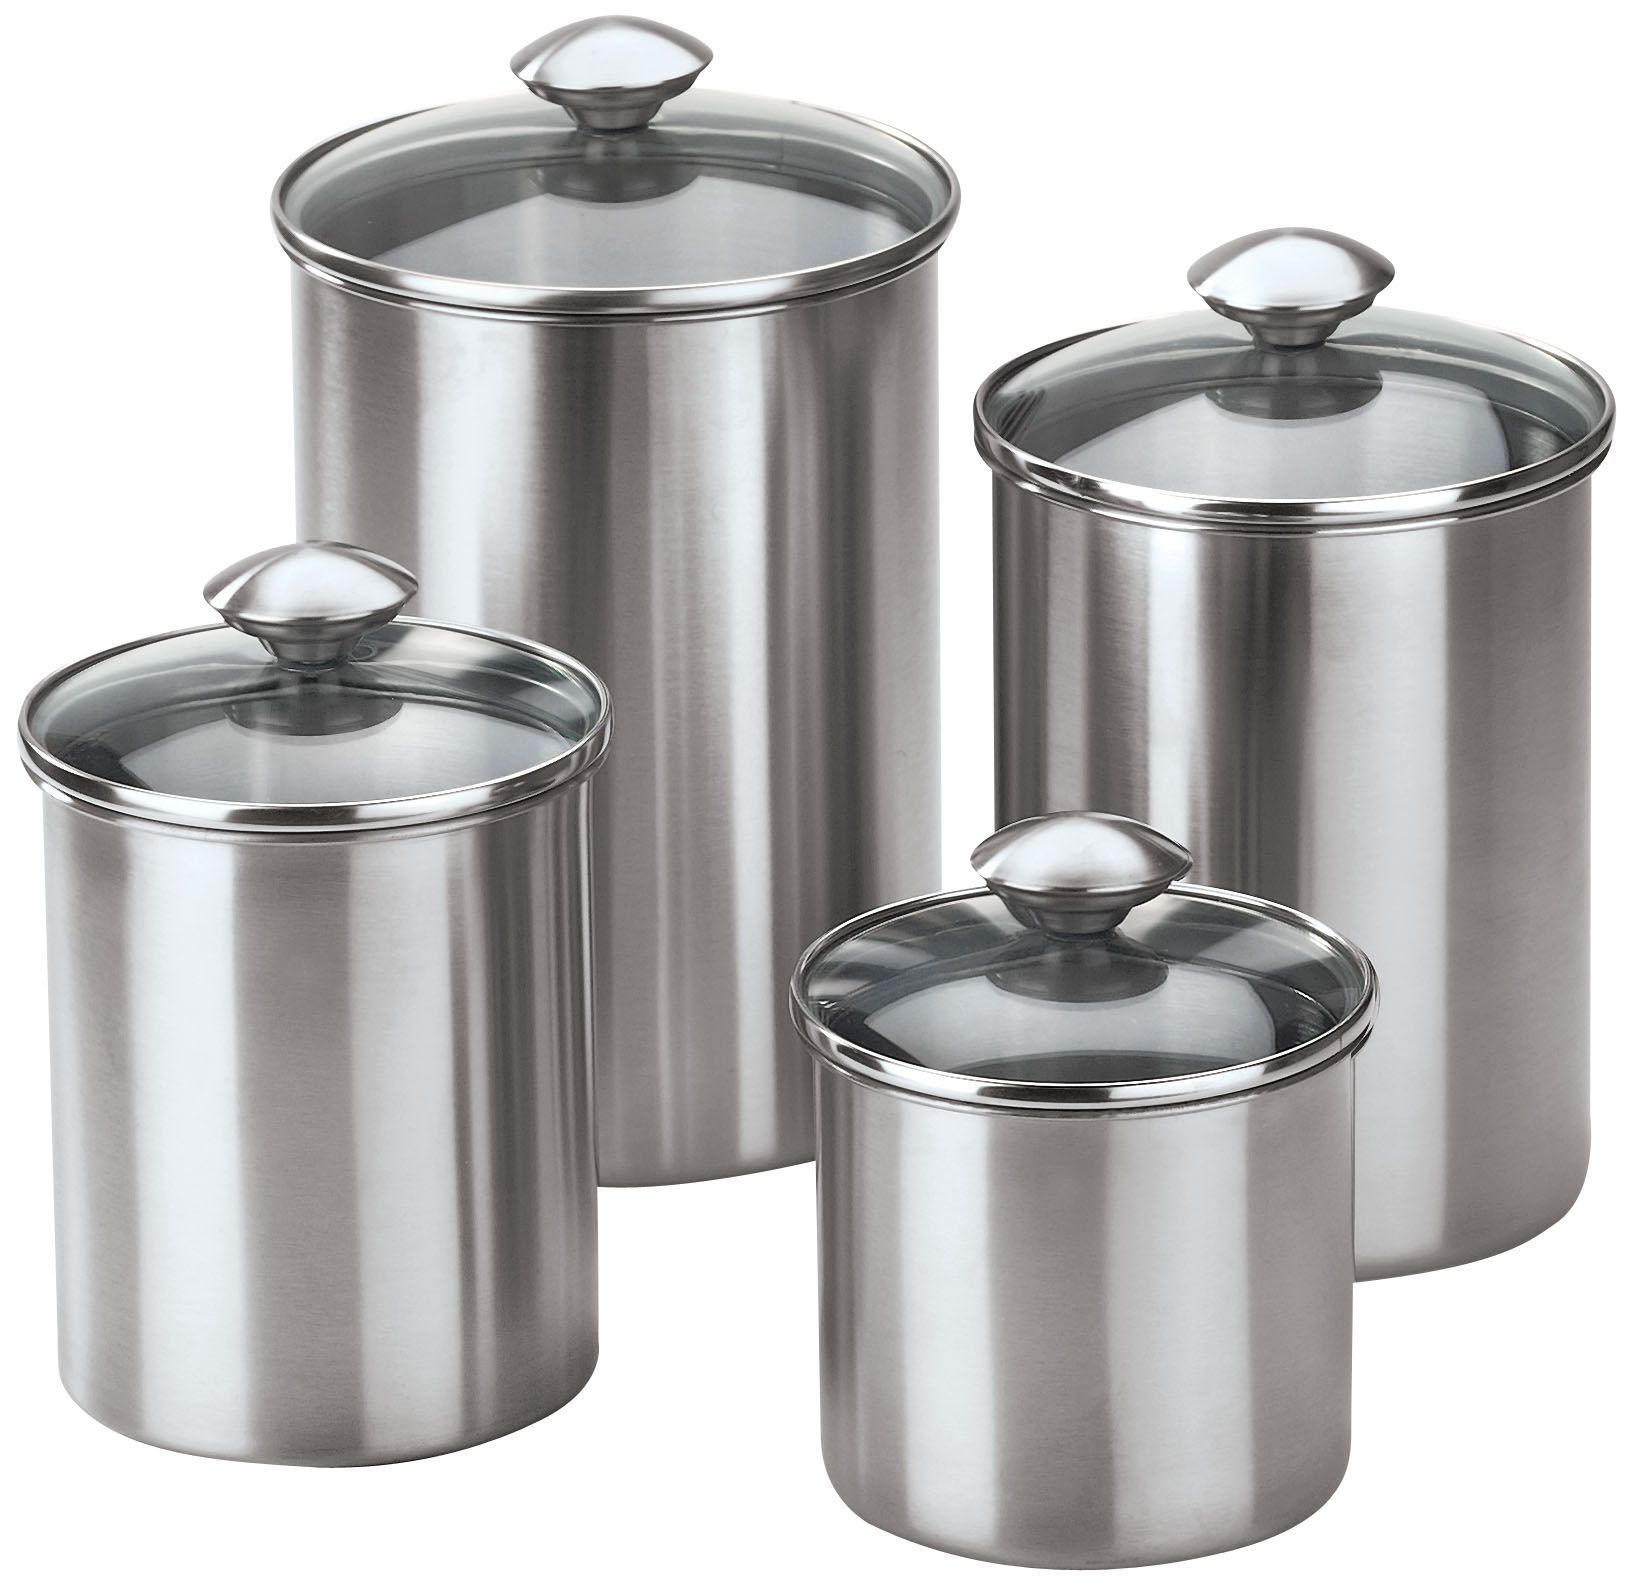 Beautiful Canisters for Kitchen Counter Canister Set Stainless Steel